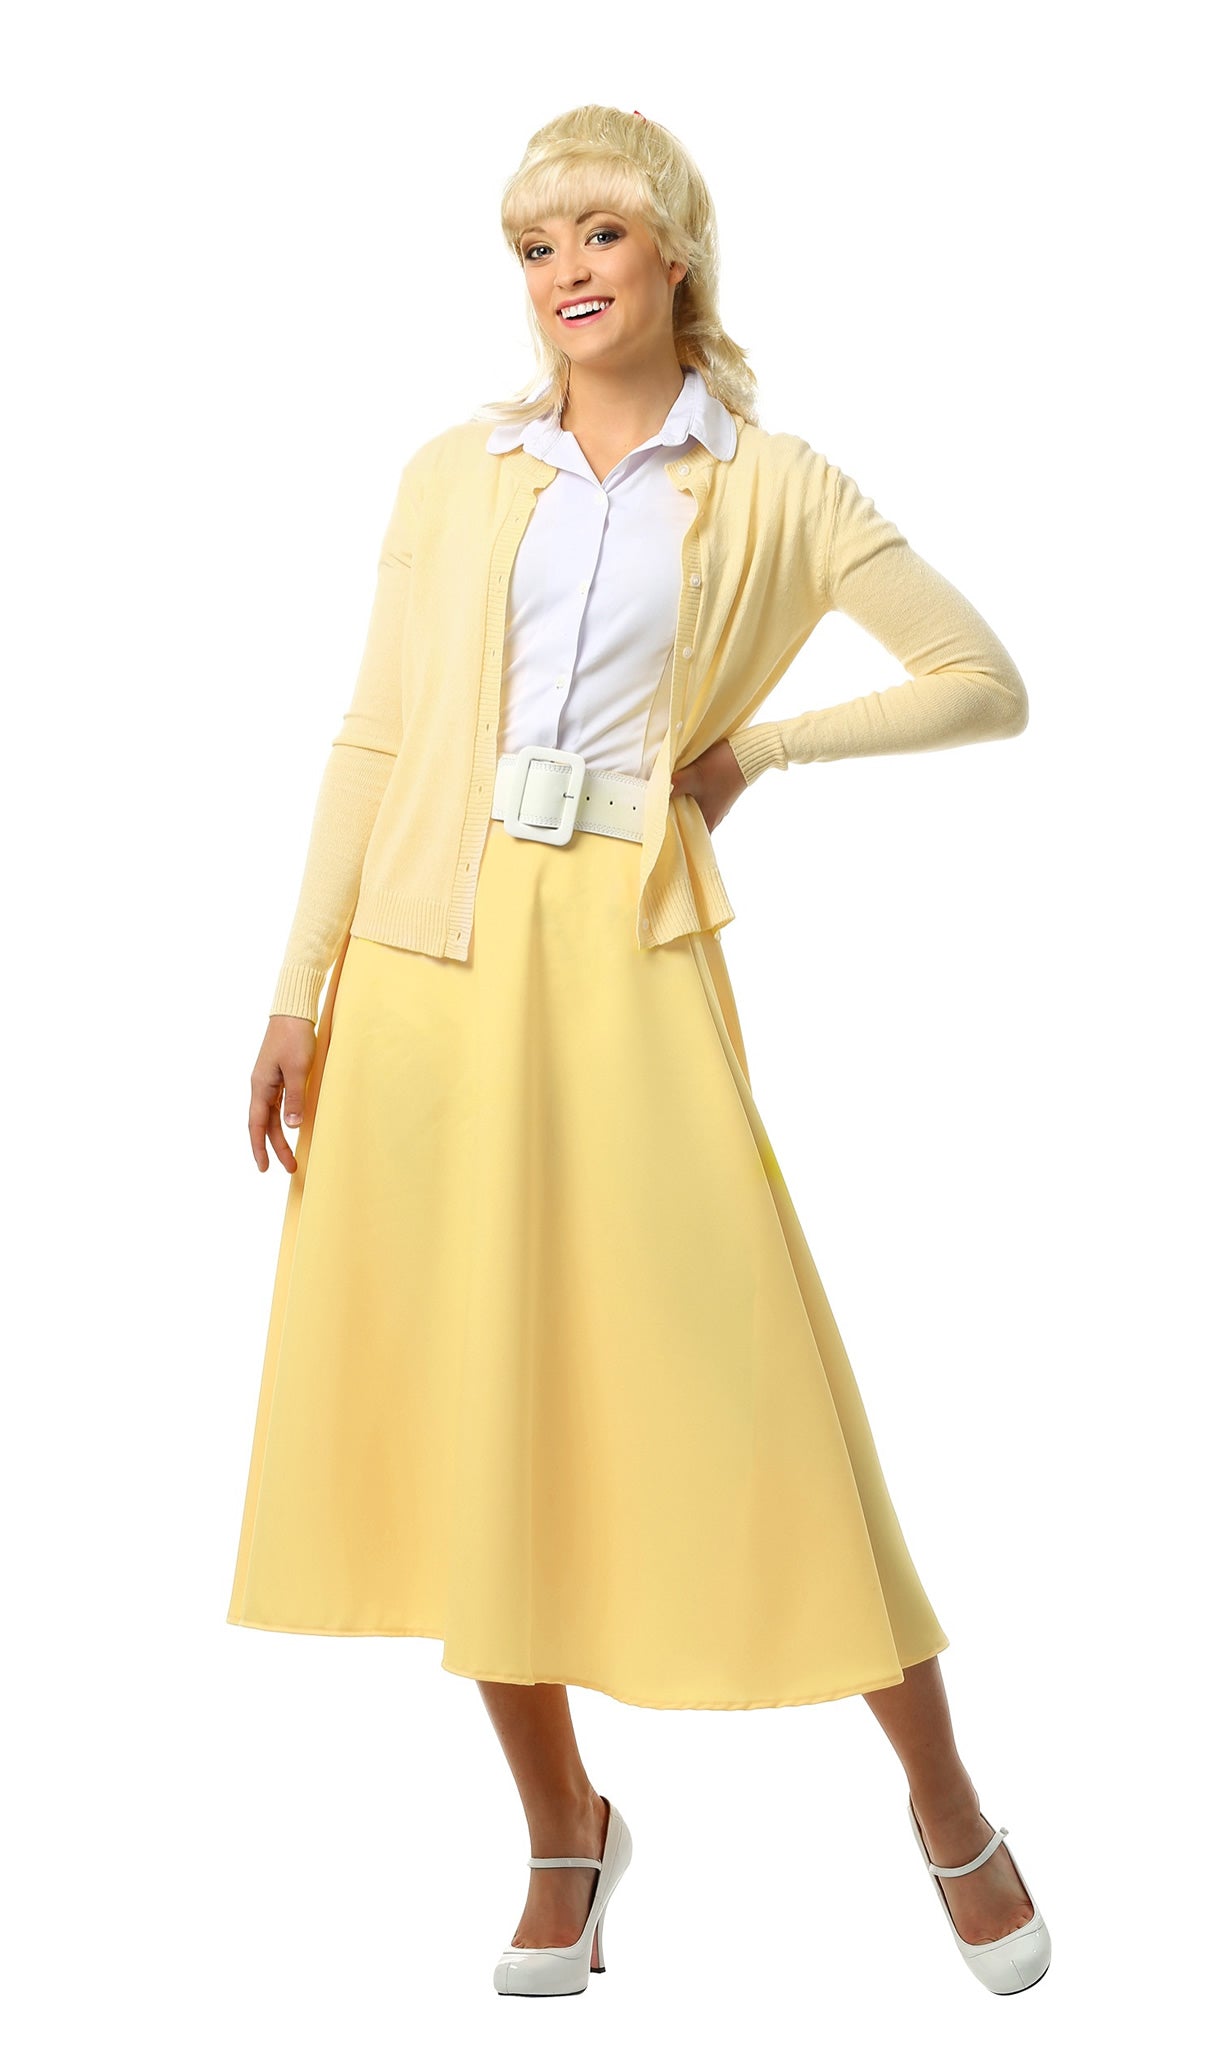 Long yellow Sandy Grease costume with cardigan, shirt and skirt